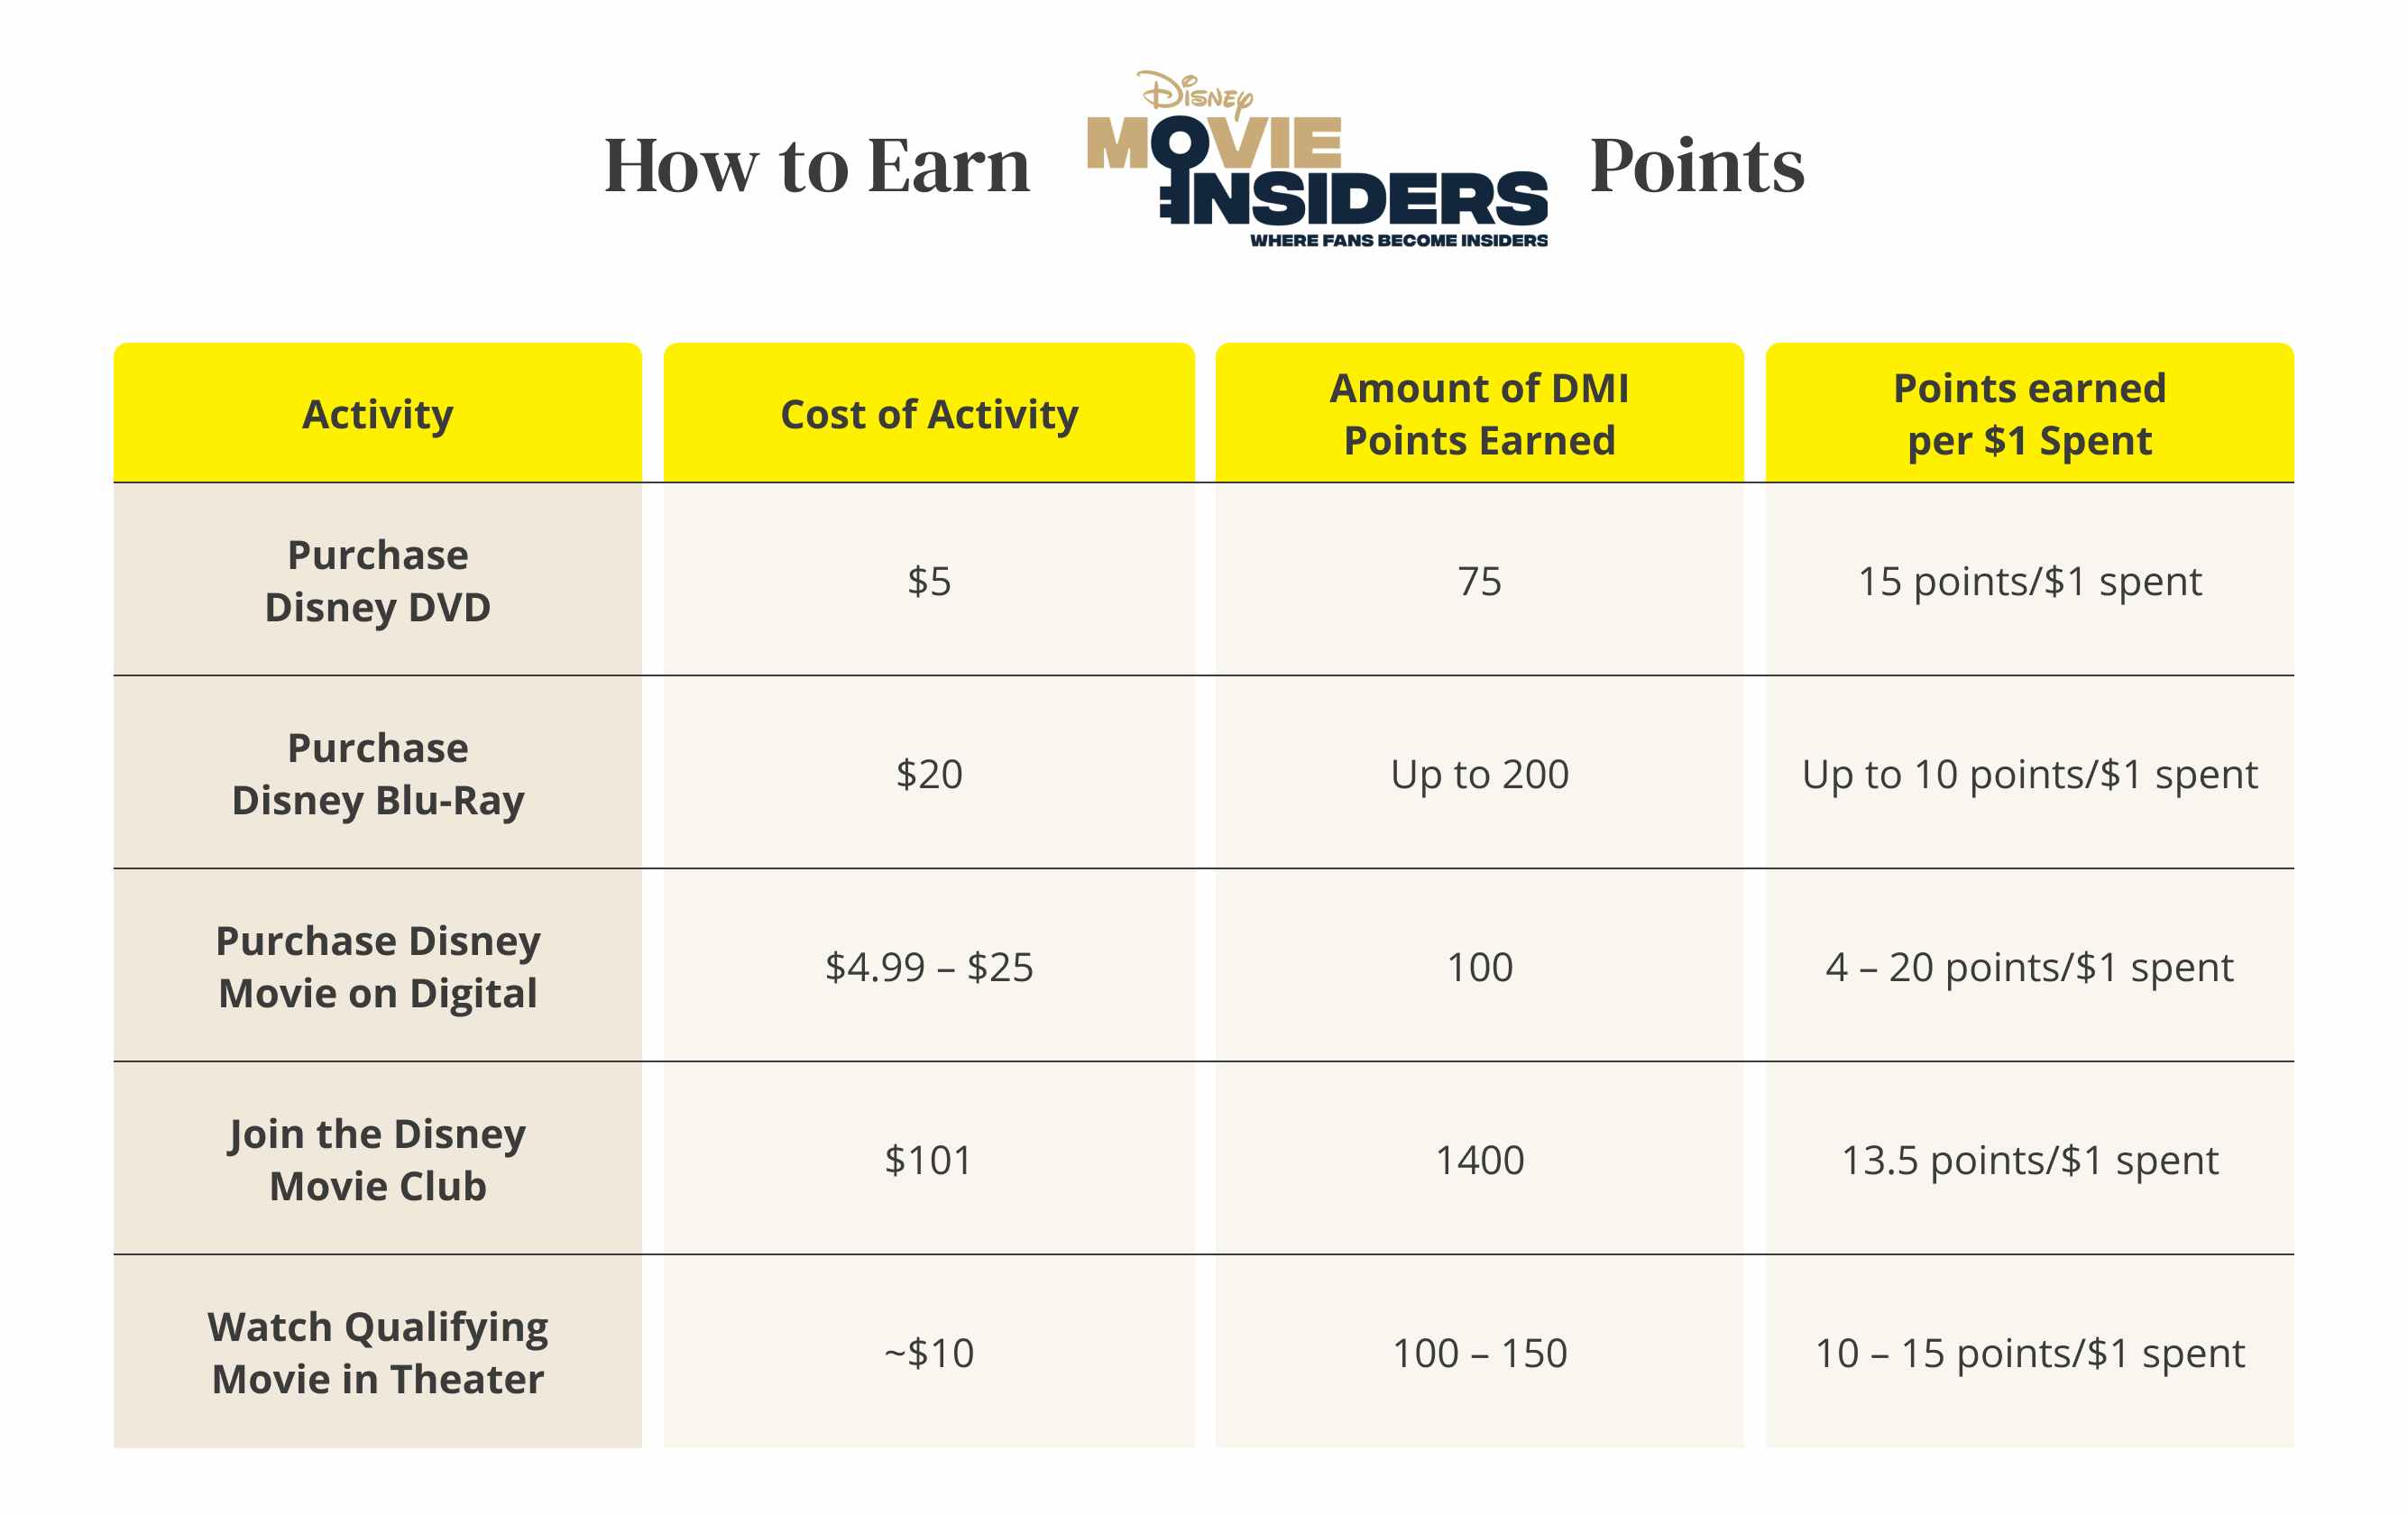 A table graphic showing ways to earn Disney Movie Insiders points